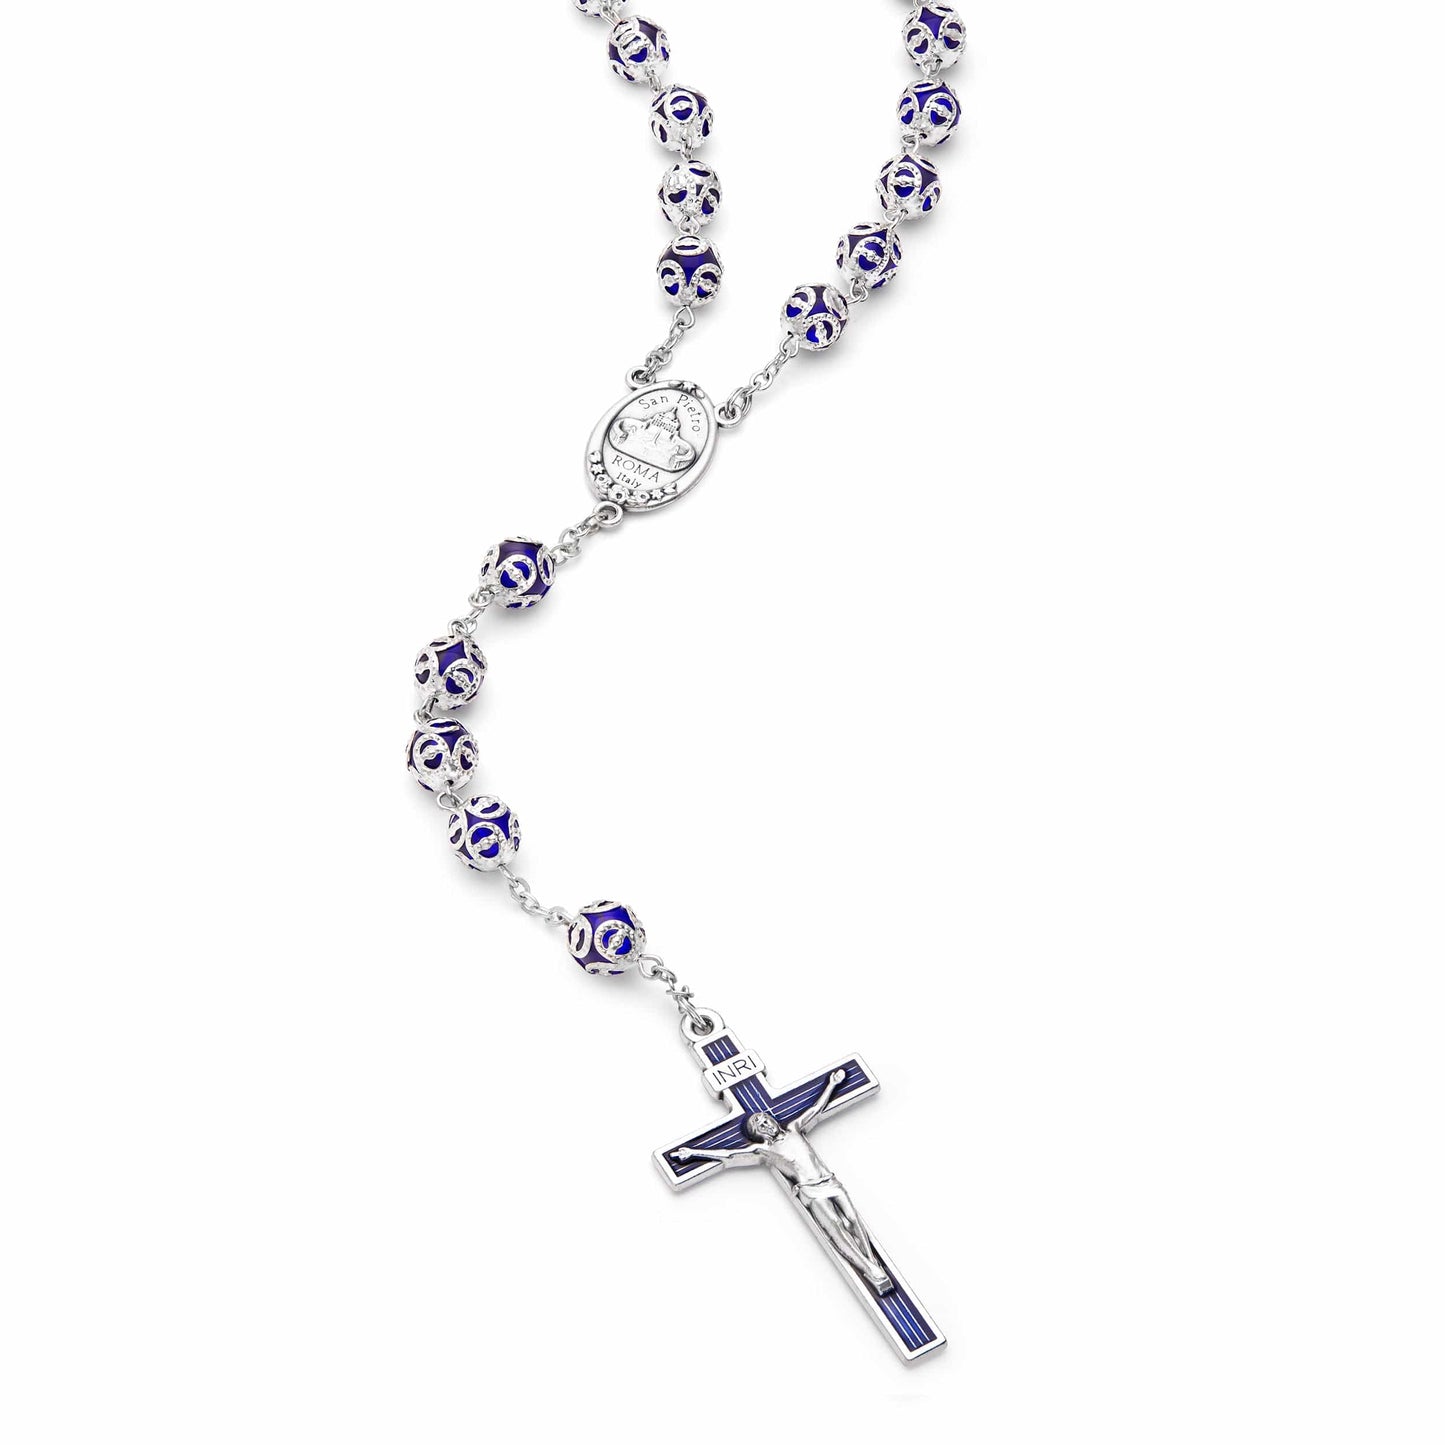 MONDO CATTOLICO Prayer Beads 62.5 cm (24.5 in) / 8 mm (0.3 in) Blue Glass Capped Beads Rosary